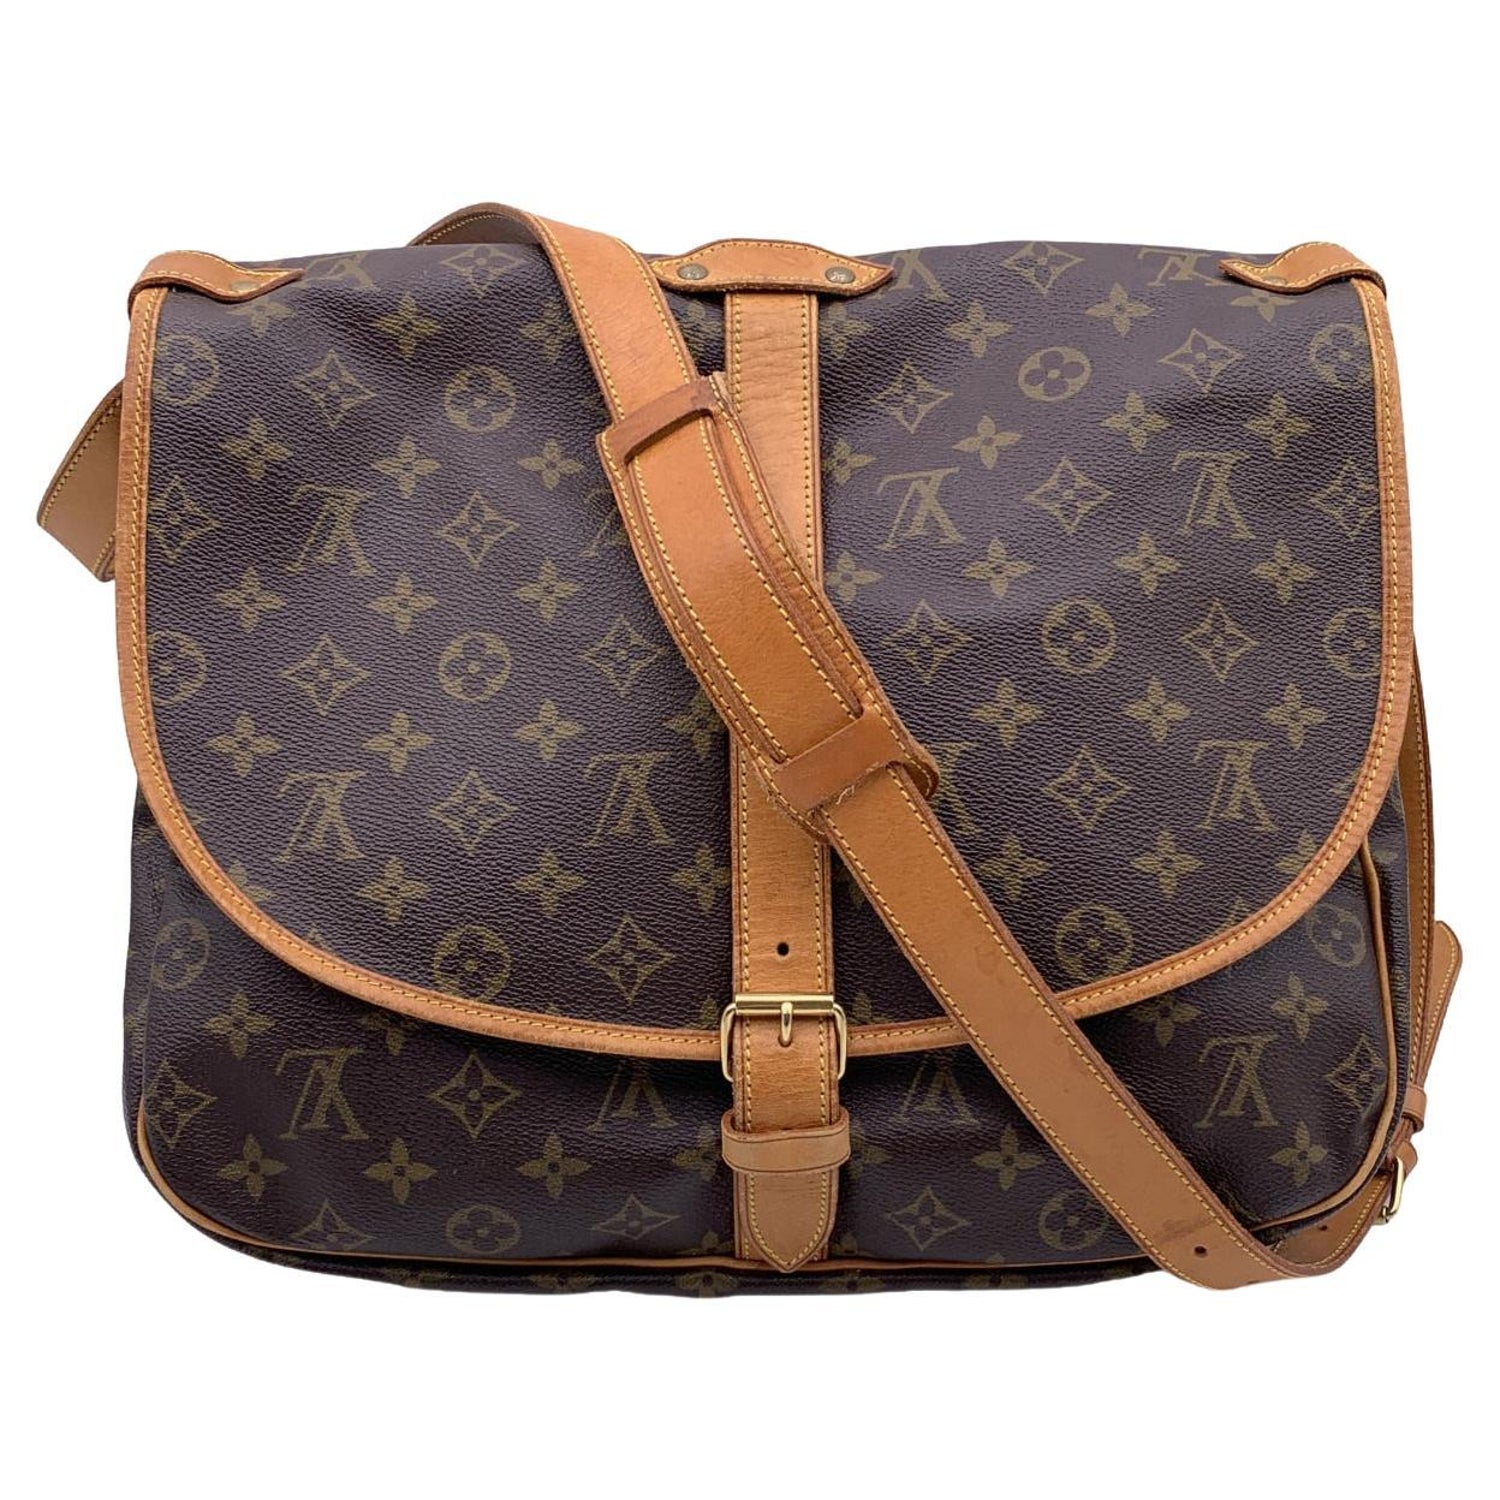 NEW NEW NEW - Saumur BB in MONOGRAM!! Such a cute and practical